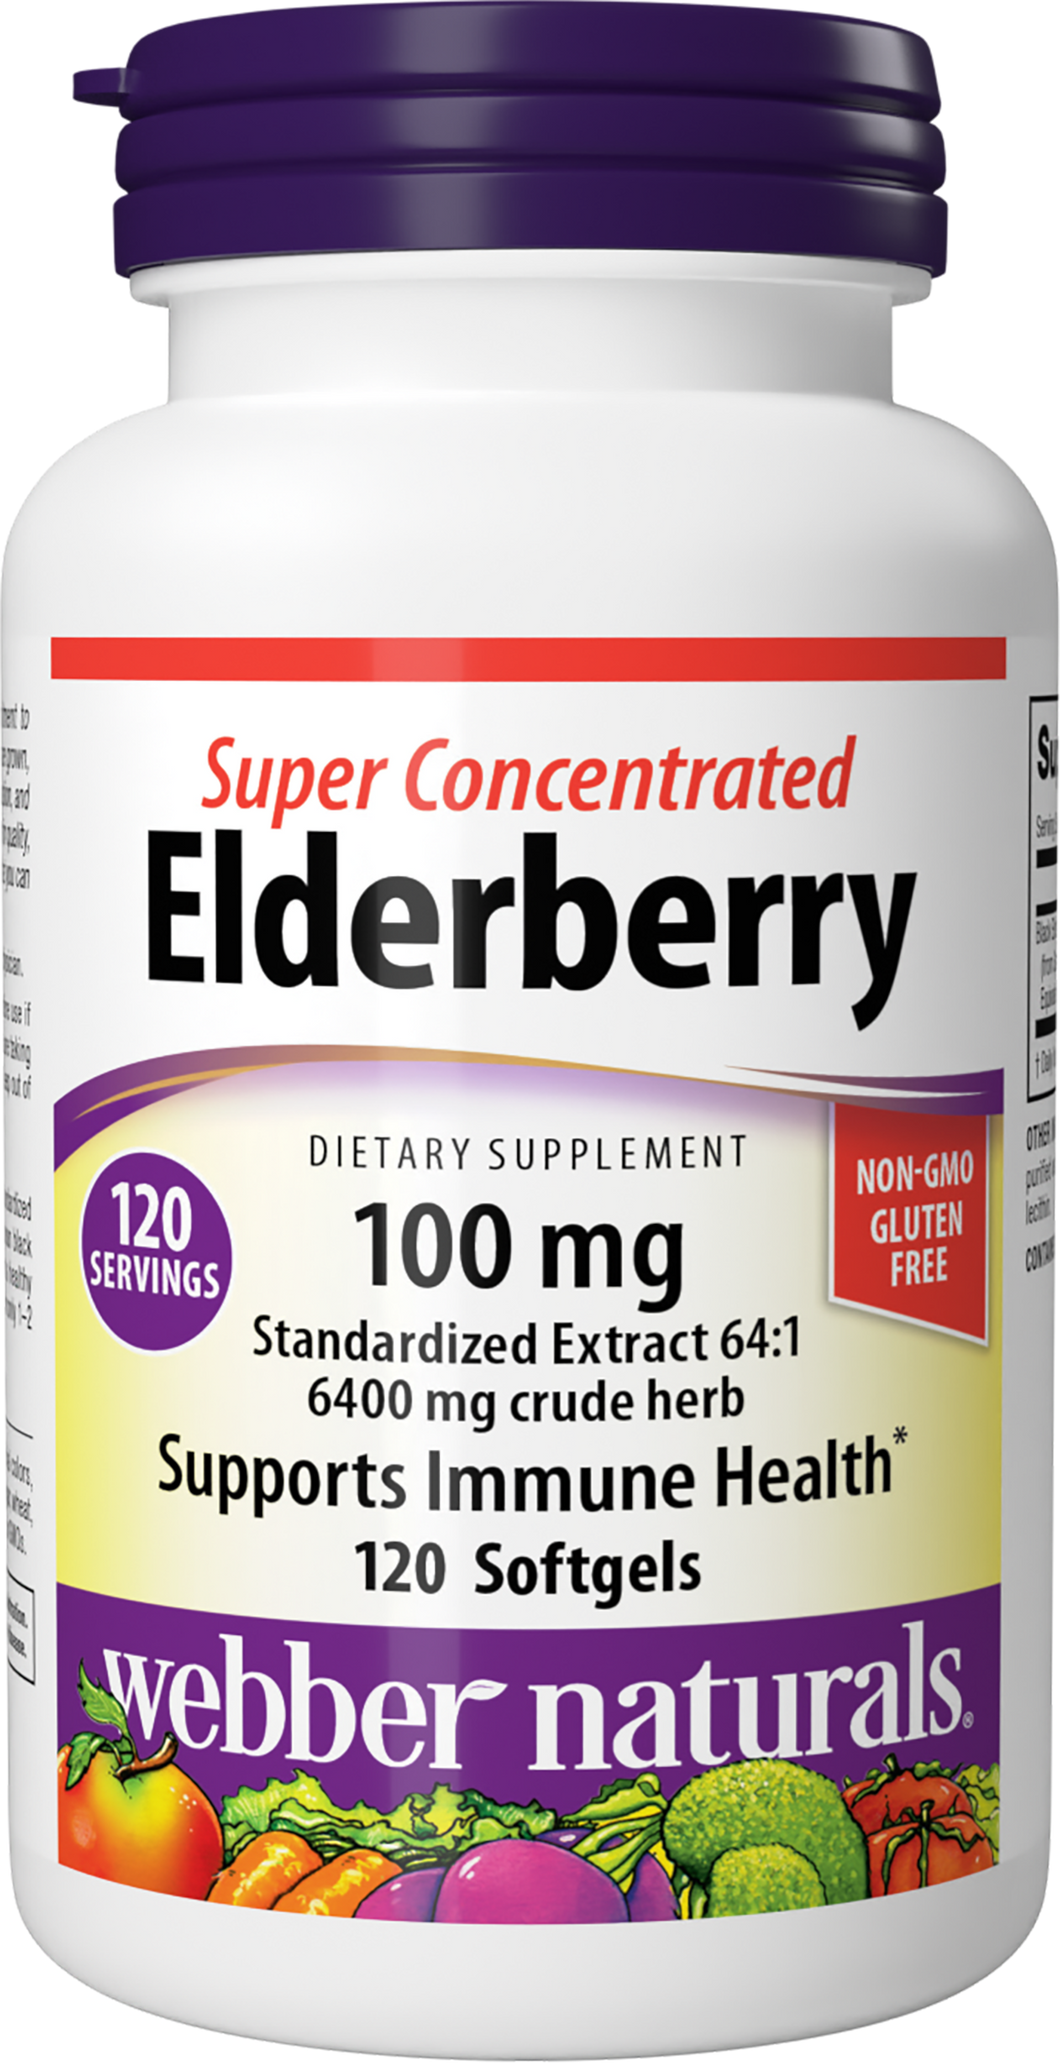 Webber Naturals Super Concentrated Elderberry Supplement, 6,400 mg Per Softgel, 120 Softgels, European Black Elderberry, Immune and Antioxidant Support, Gluten, Sugar and Dairy Free, Non-GMO